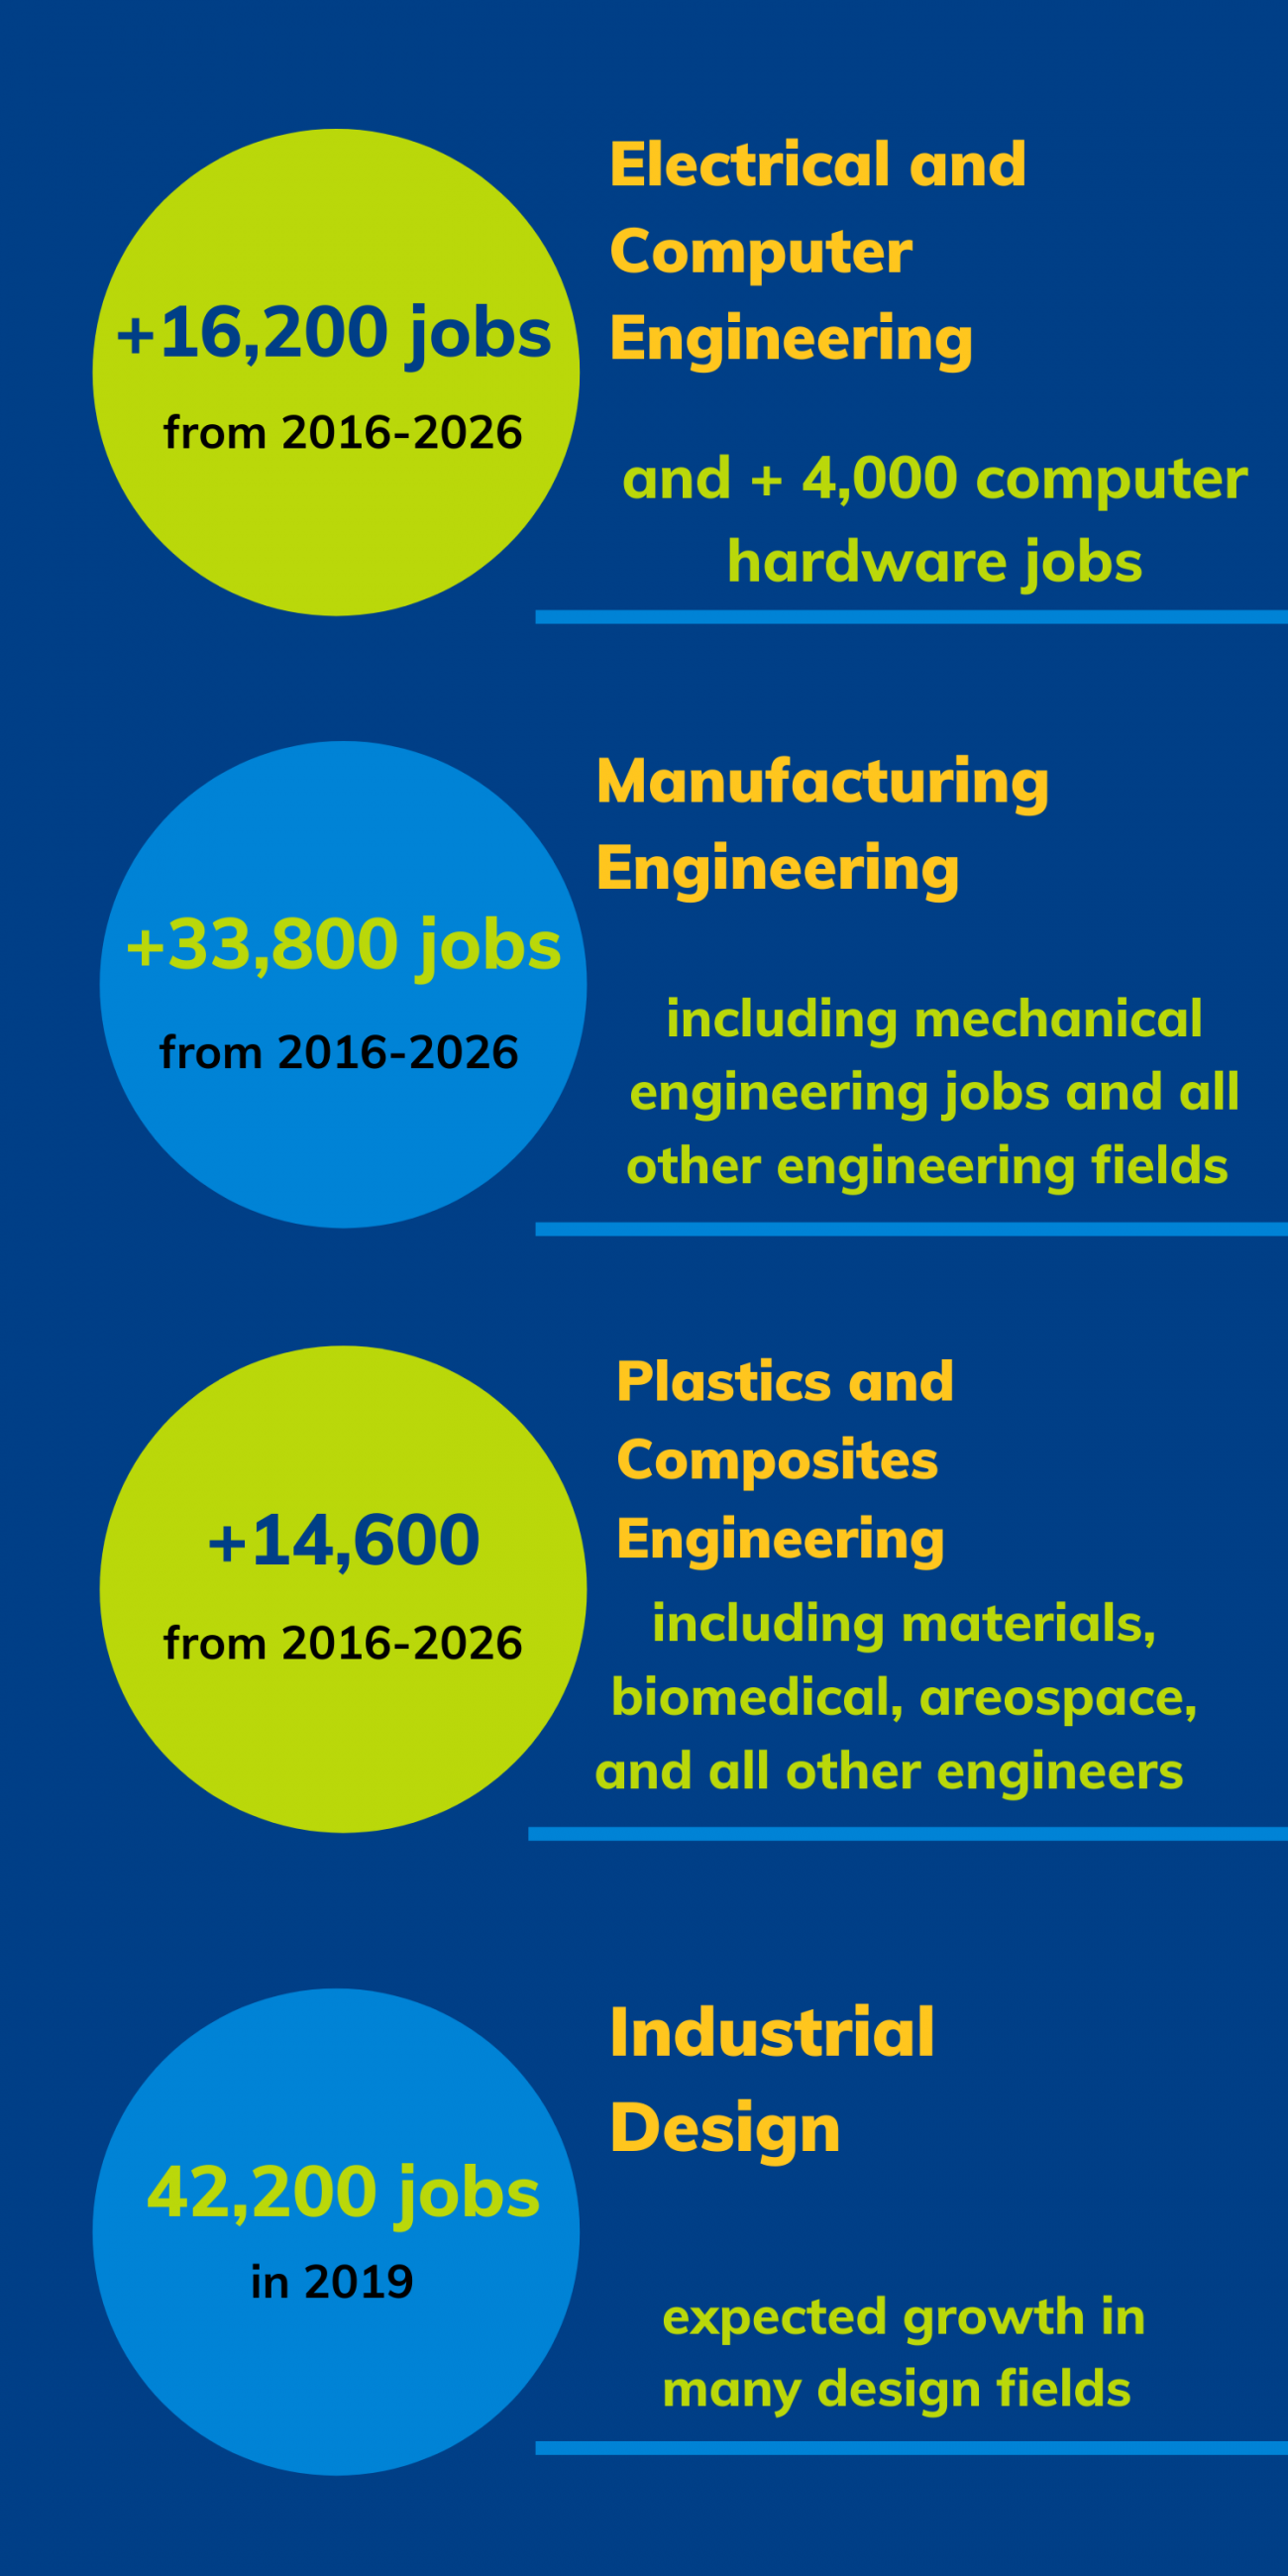 information about job growth: Electrical and Computer Engineering expected to grow by 16,200 jobs from 2016-2026, Manufacturing engineering to grow by 33,800 jobs from 2016-2026, plastics and composites engineering to grow by 14,600 jobs from 2016-2026, and industrial design had 42,000 jobs in 2019. 